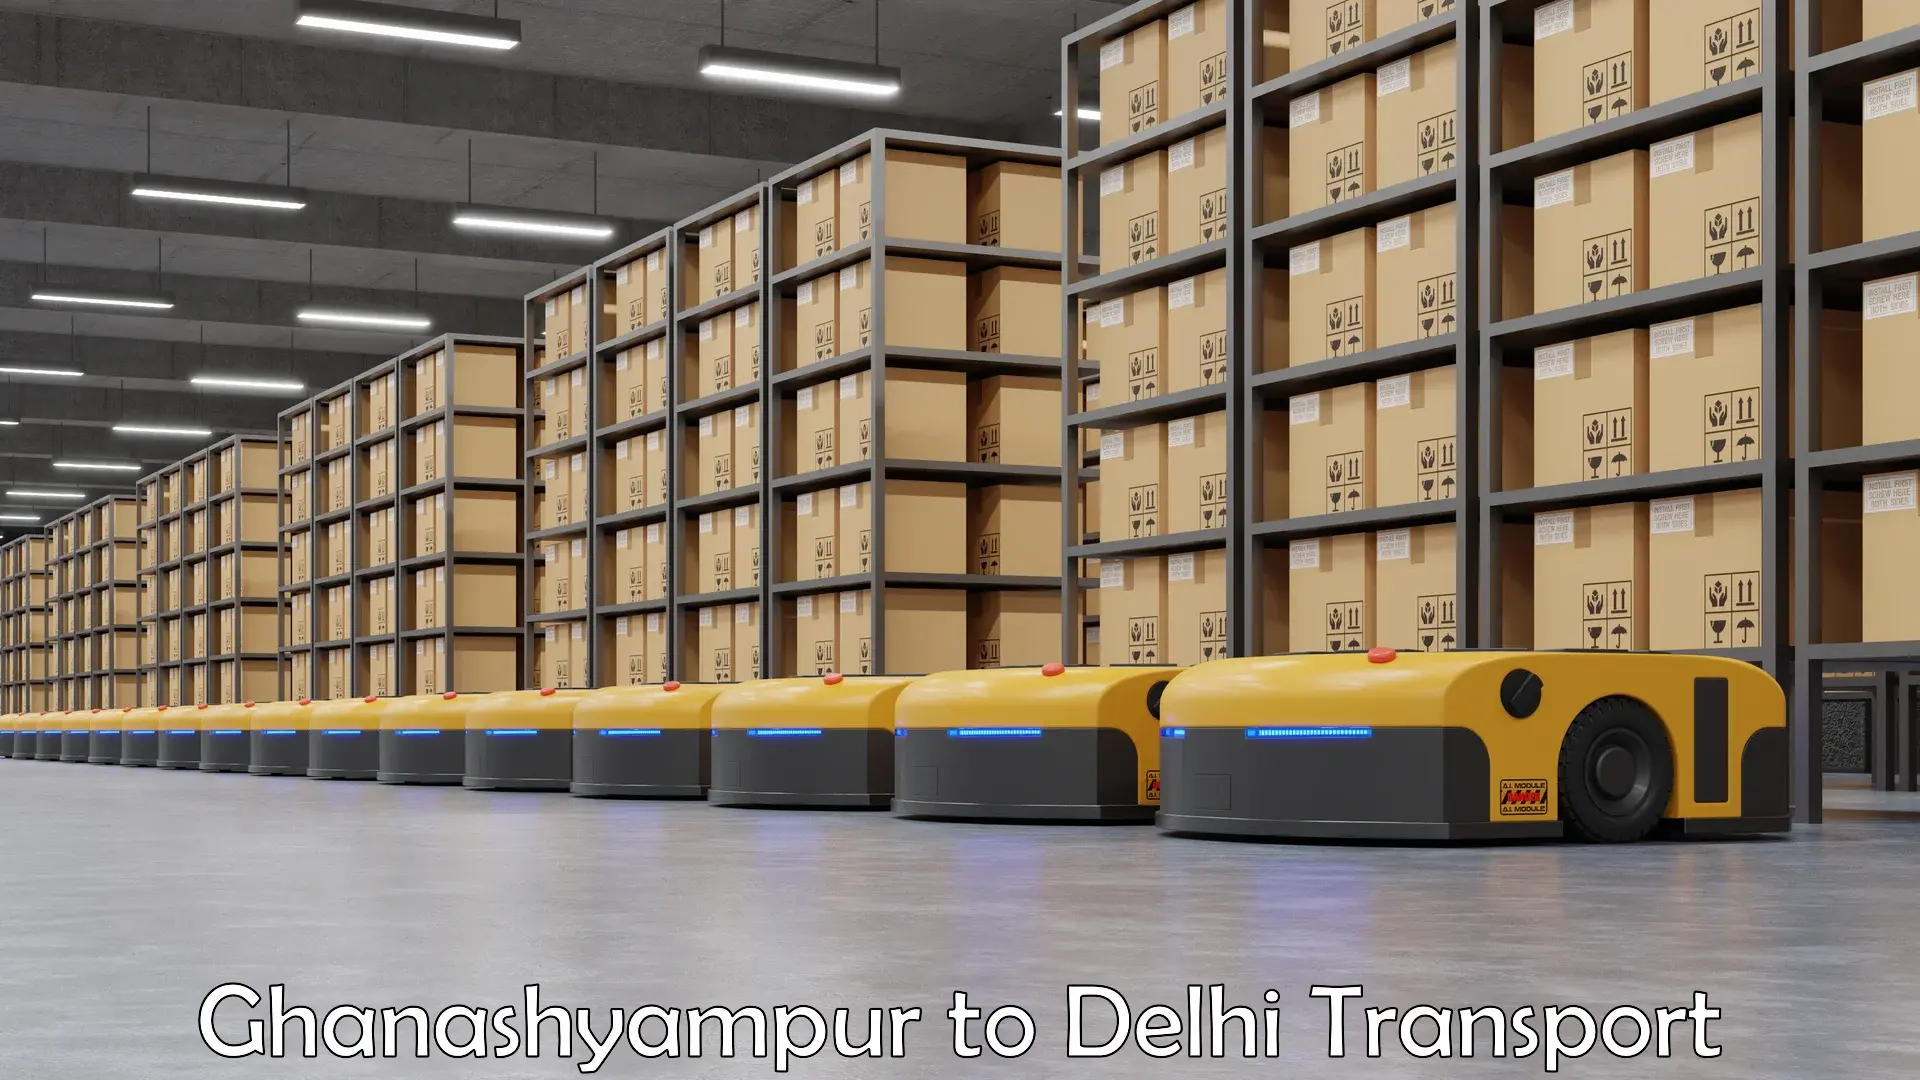 Goods delivery service Ghanashyampur to NCR